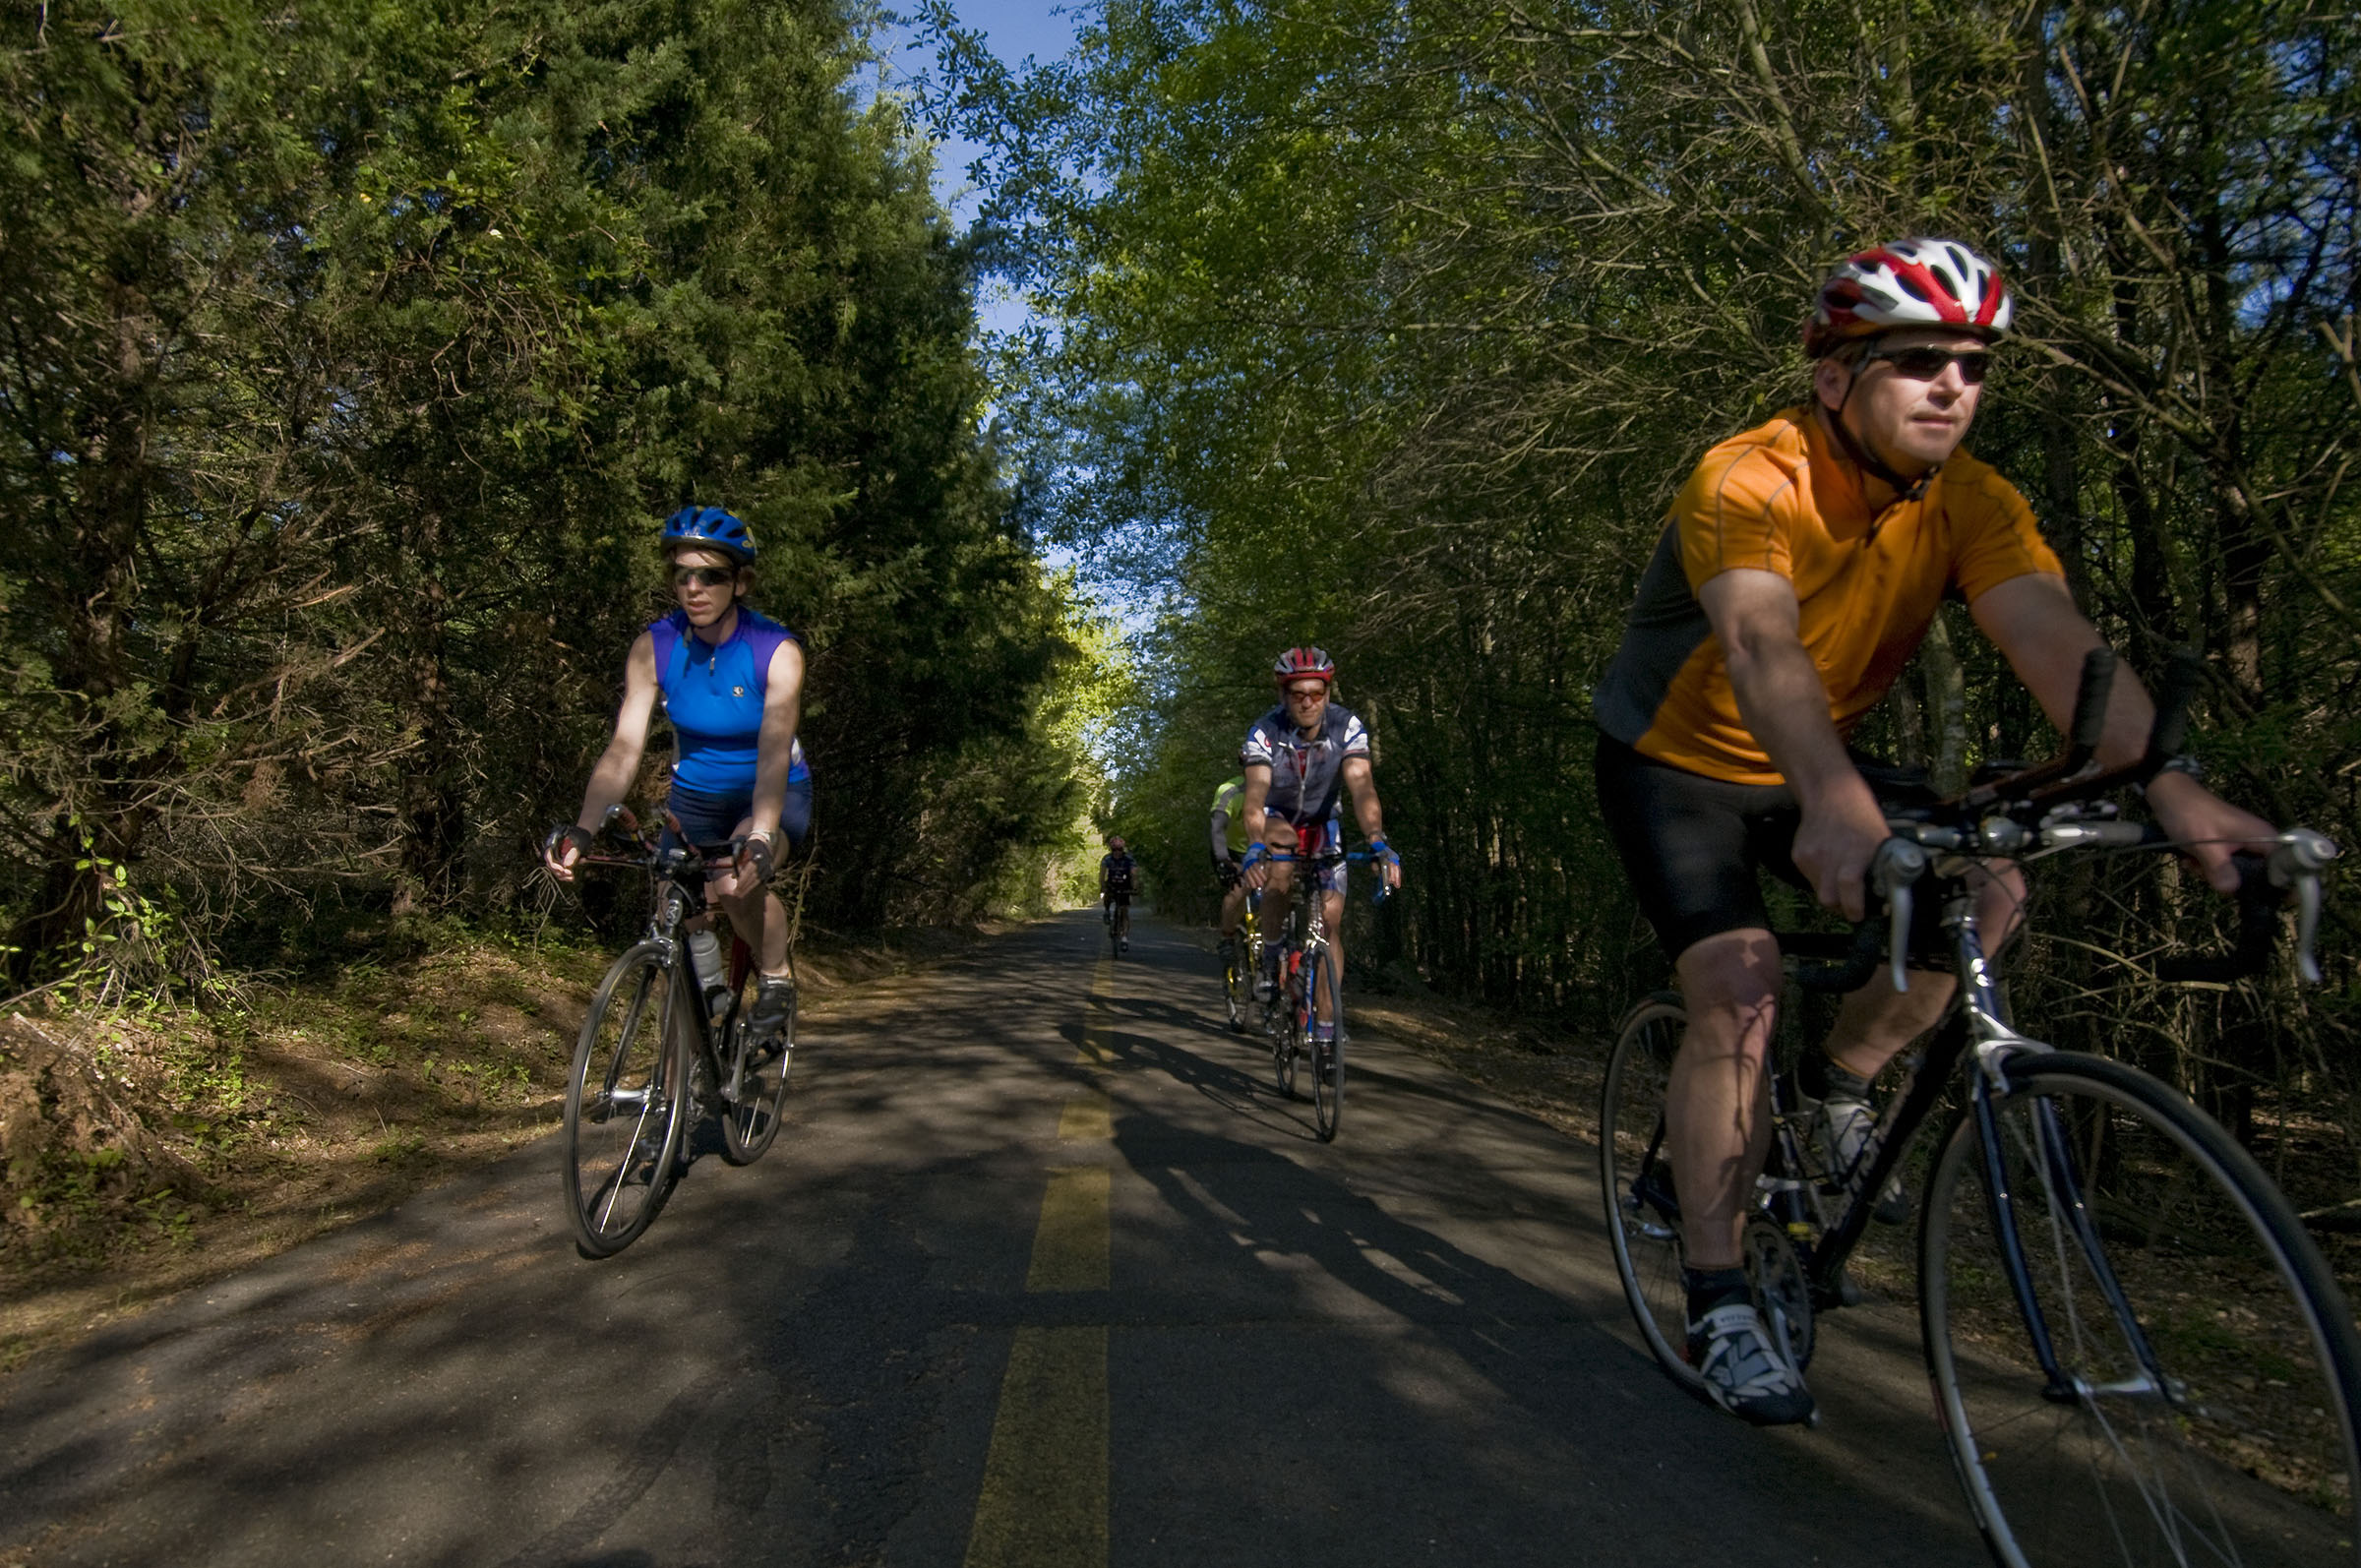 Three people on bicycles traverse a paved route under tall green trees